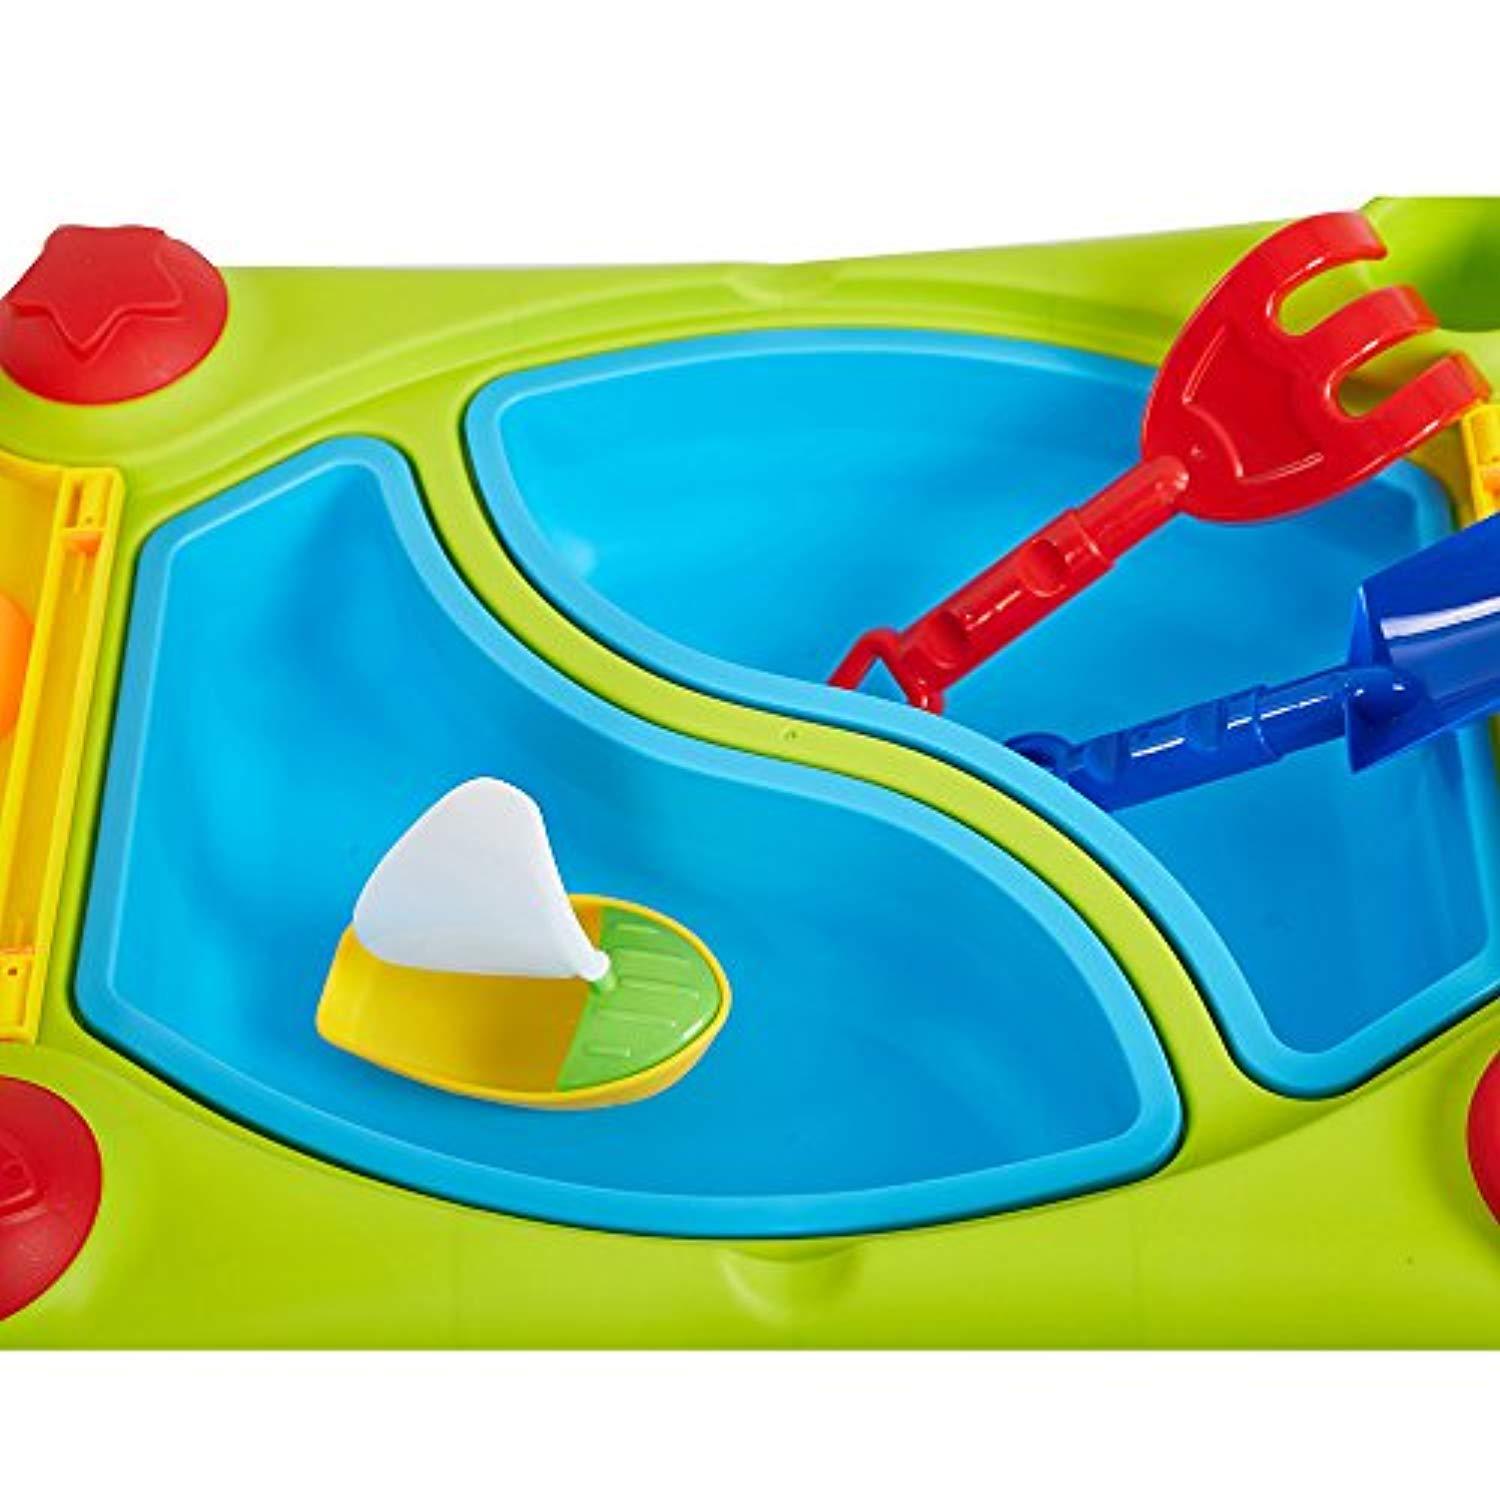 Bosonshop Outdoor Sand and Water Table Activity Table and Waterpark Play Table for Toddlers